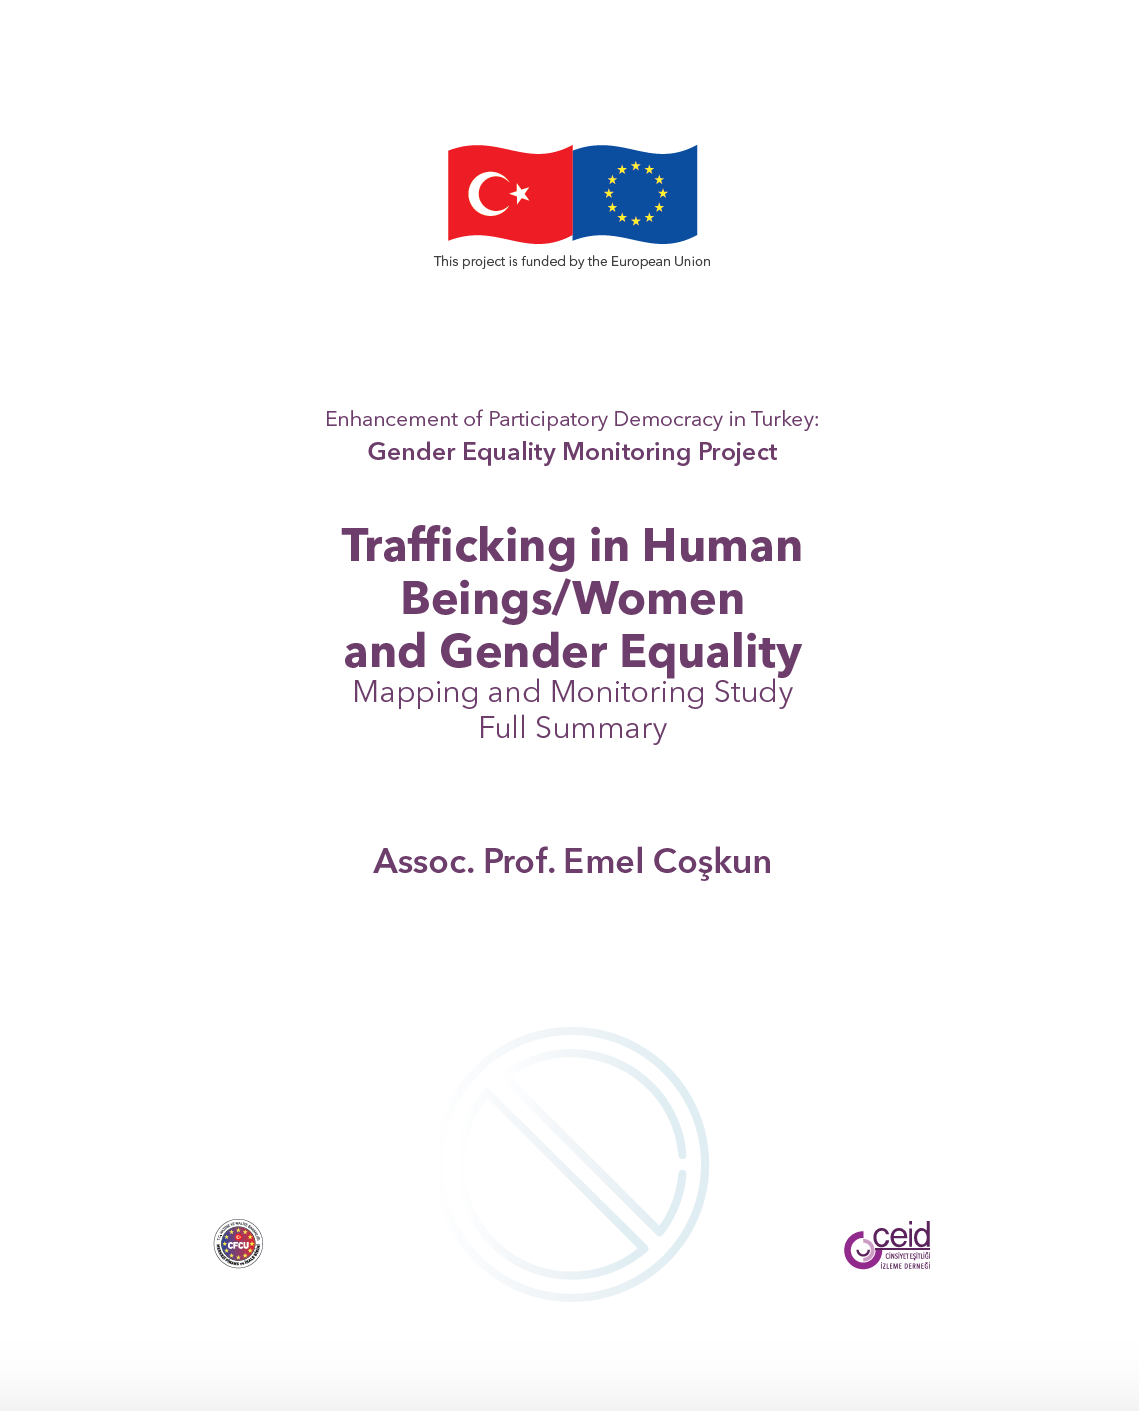 Trafficking in Human Beings/Women and Gender Equality